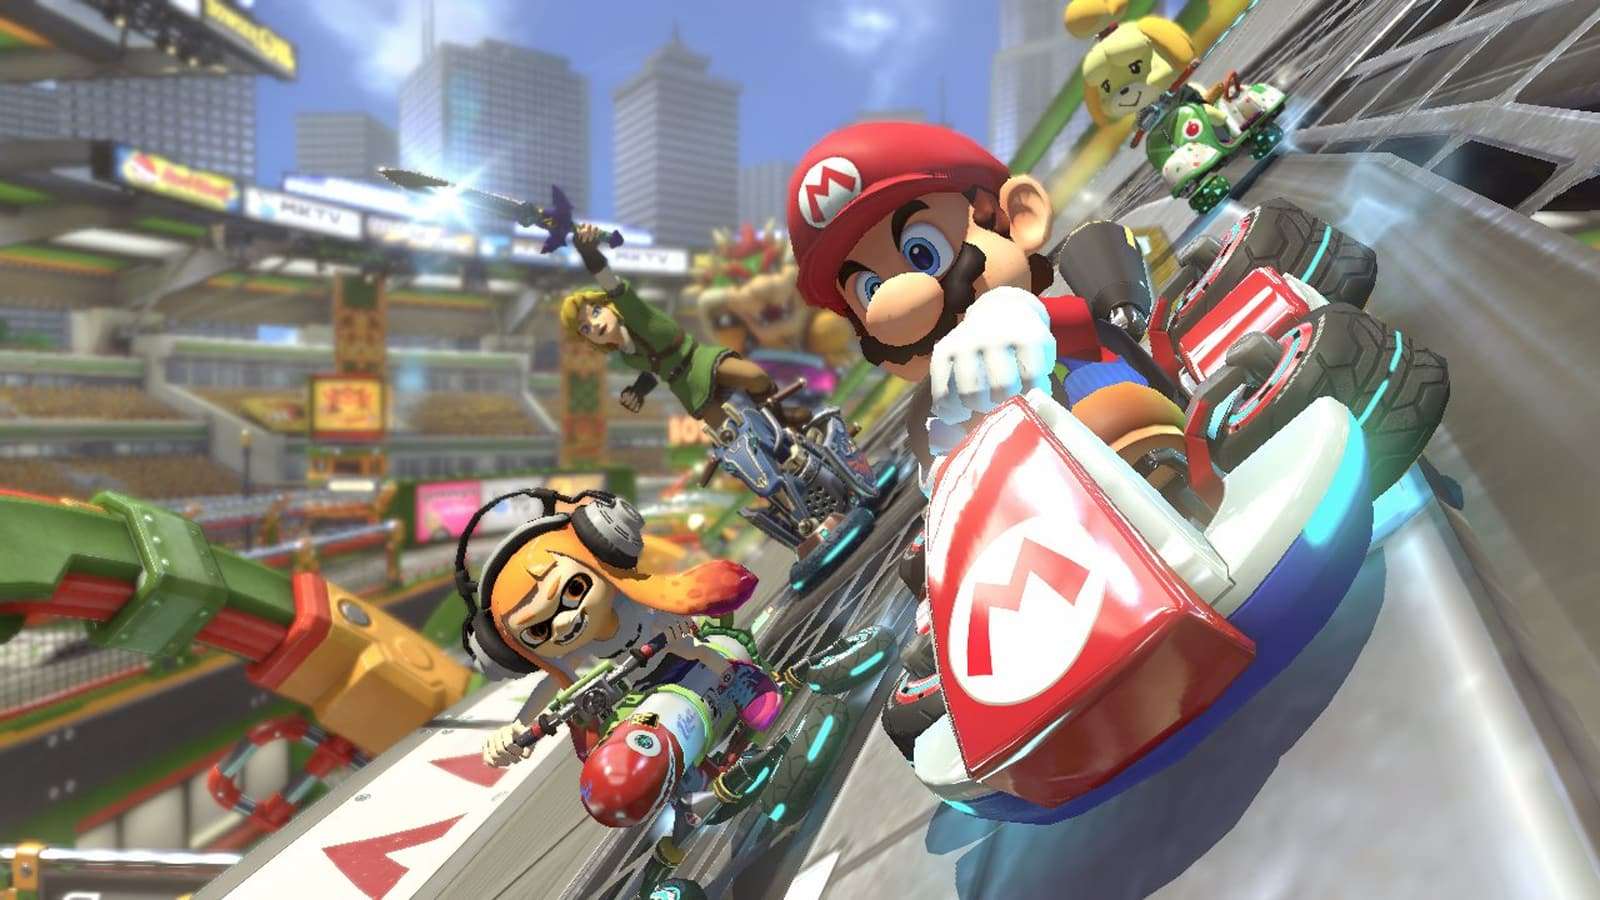 Some in-game characters from Mario Kart 8 Deluxe